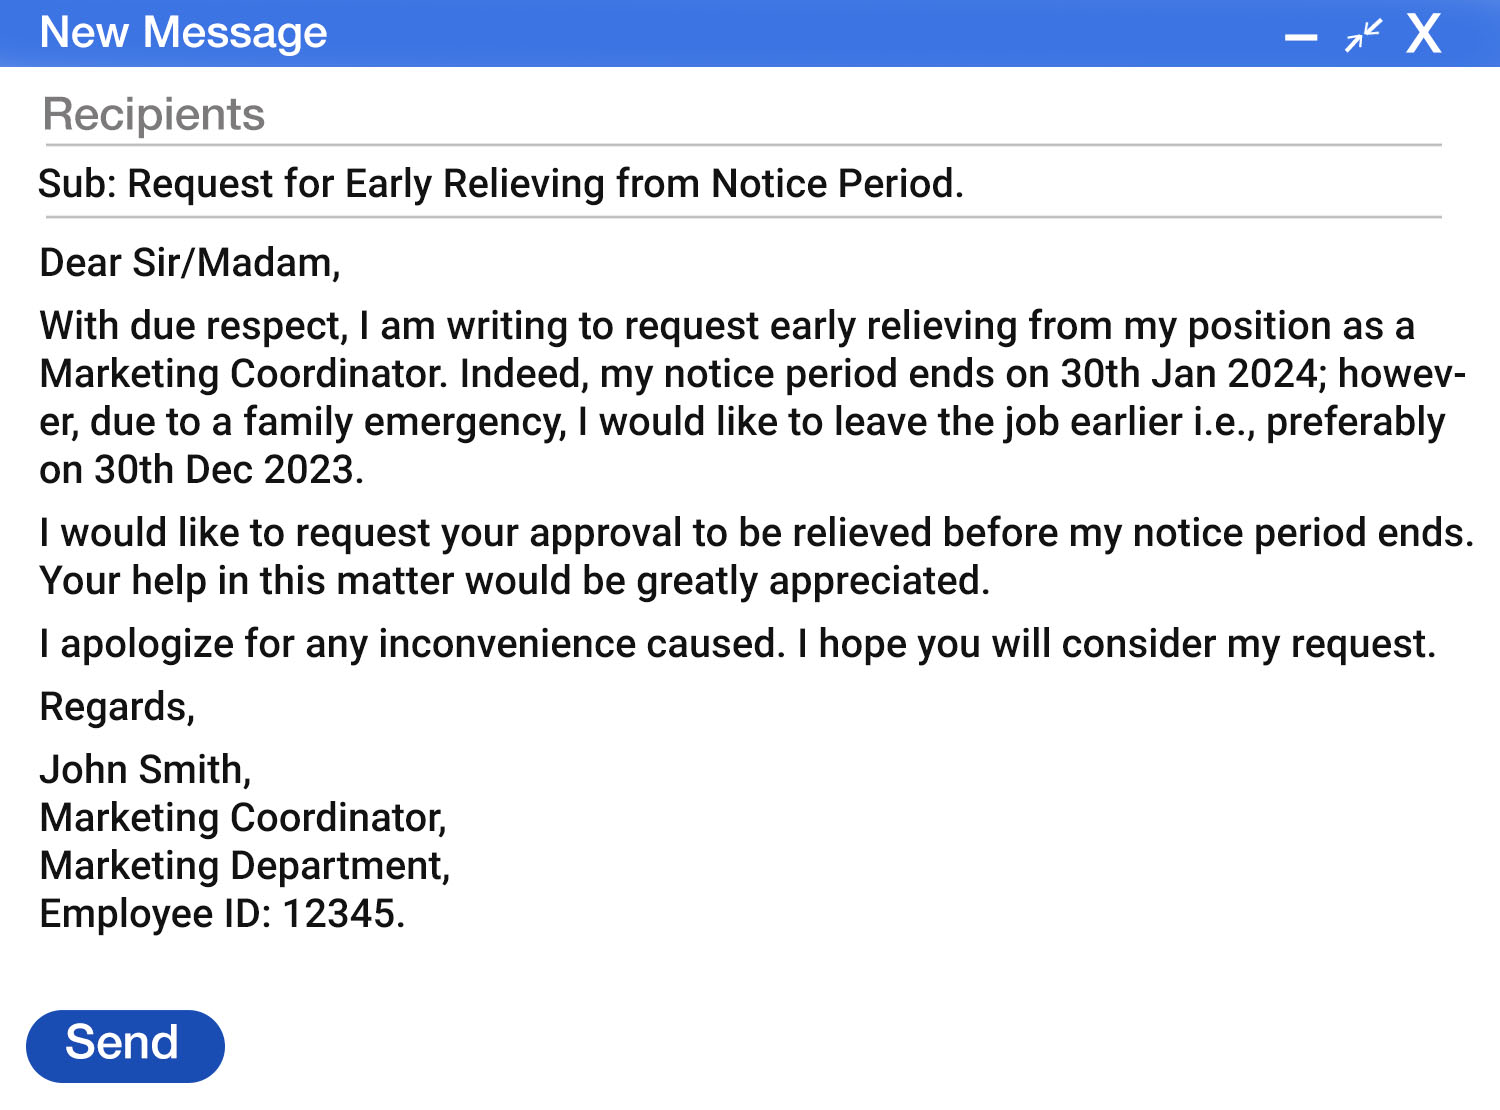 Early relieving email from notice period